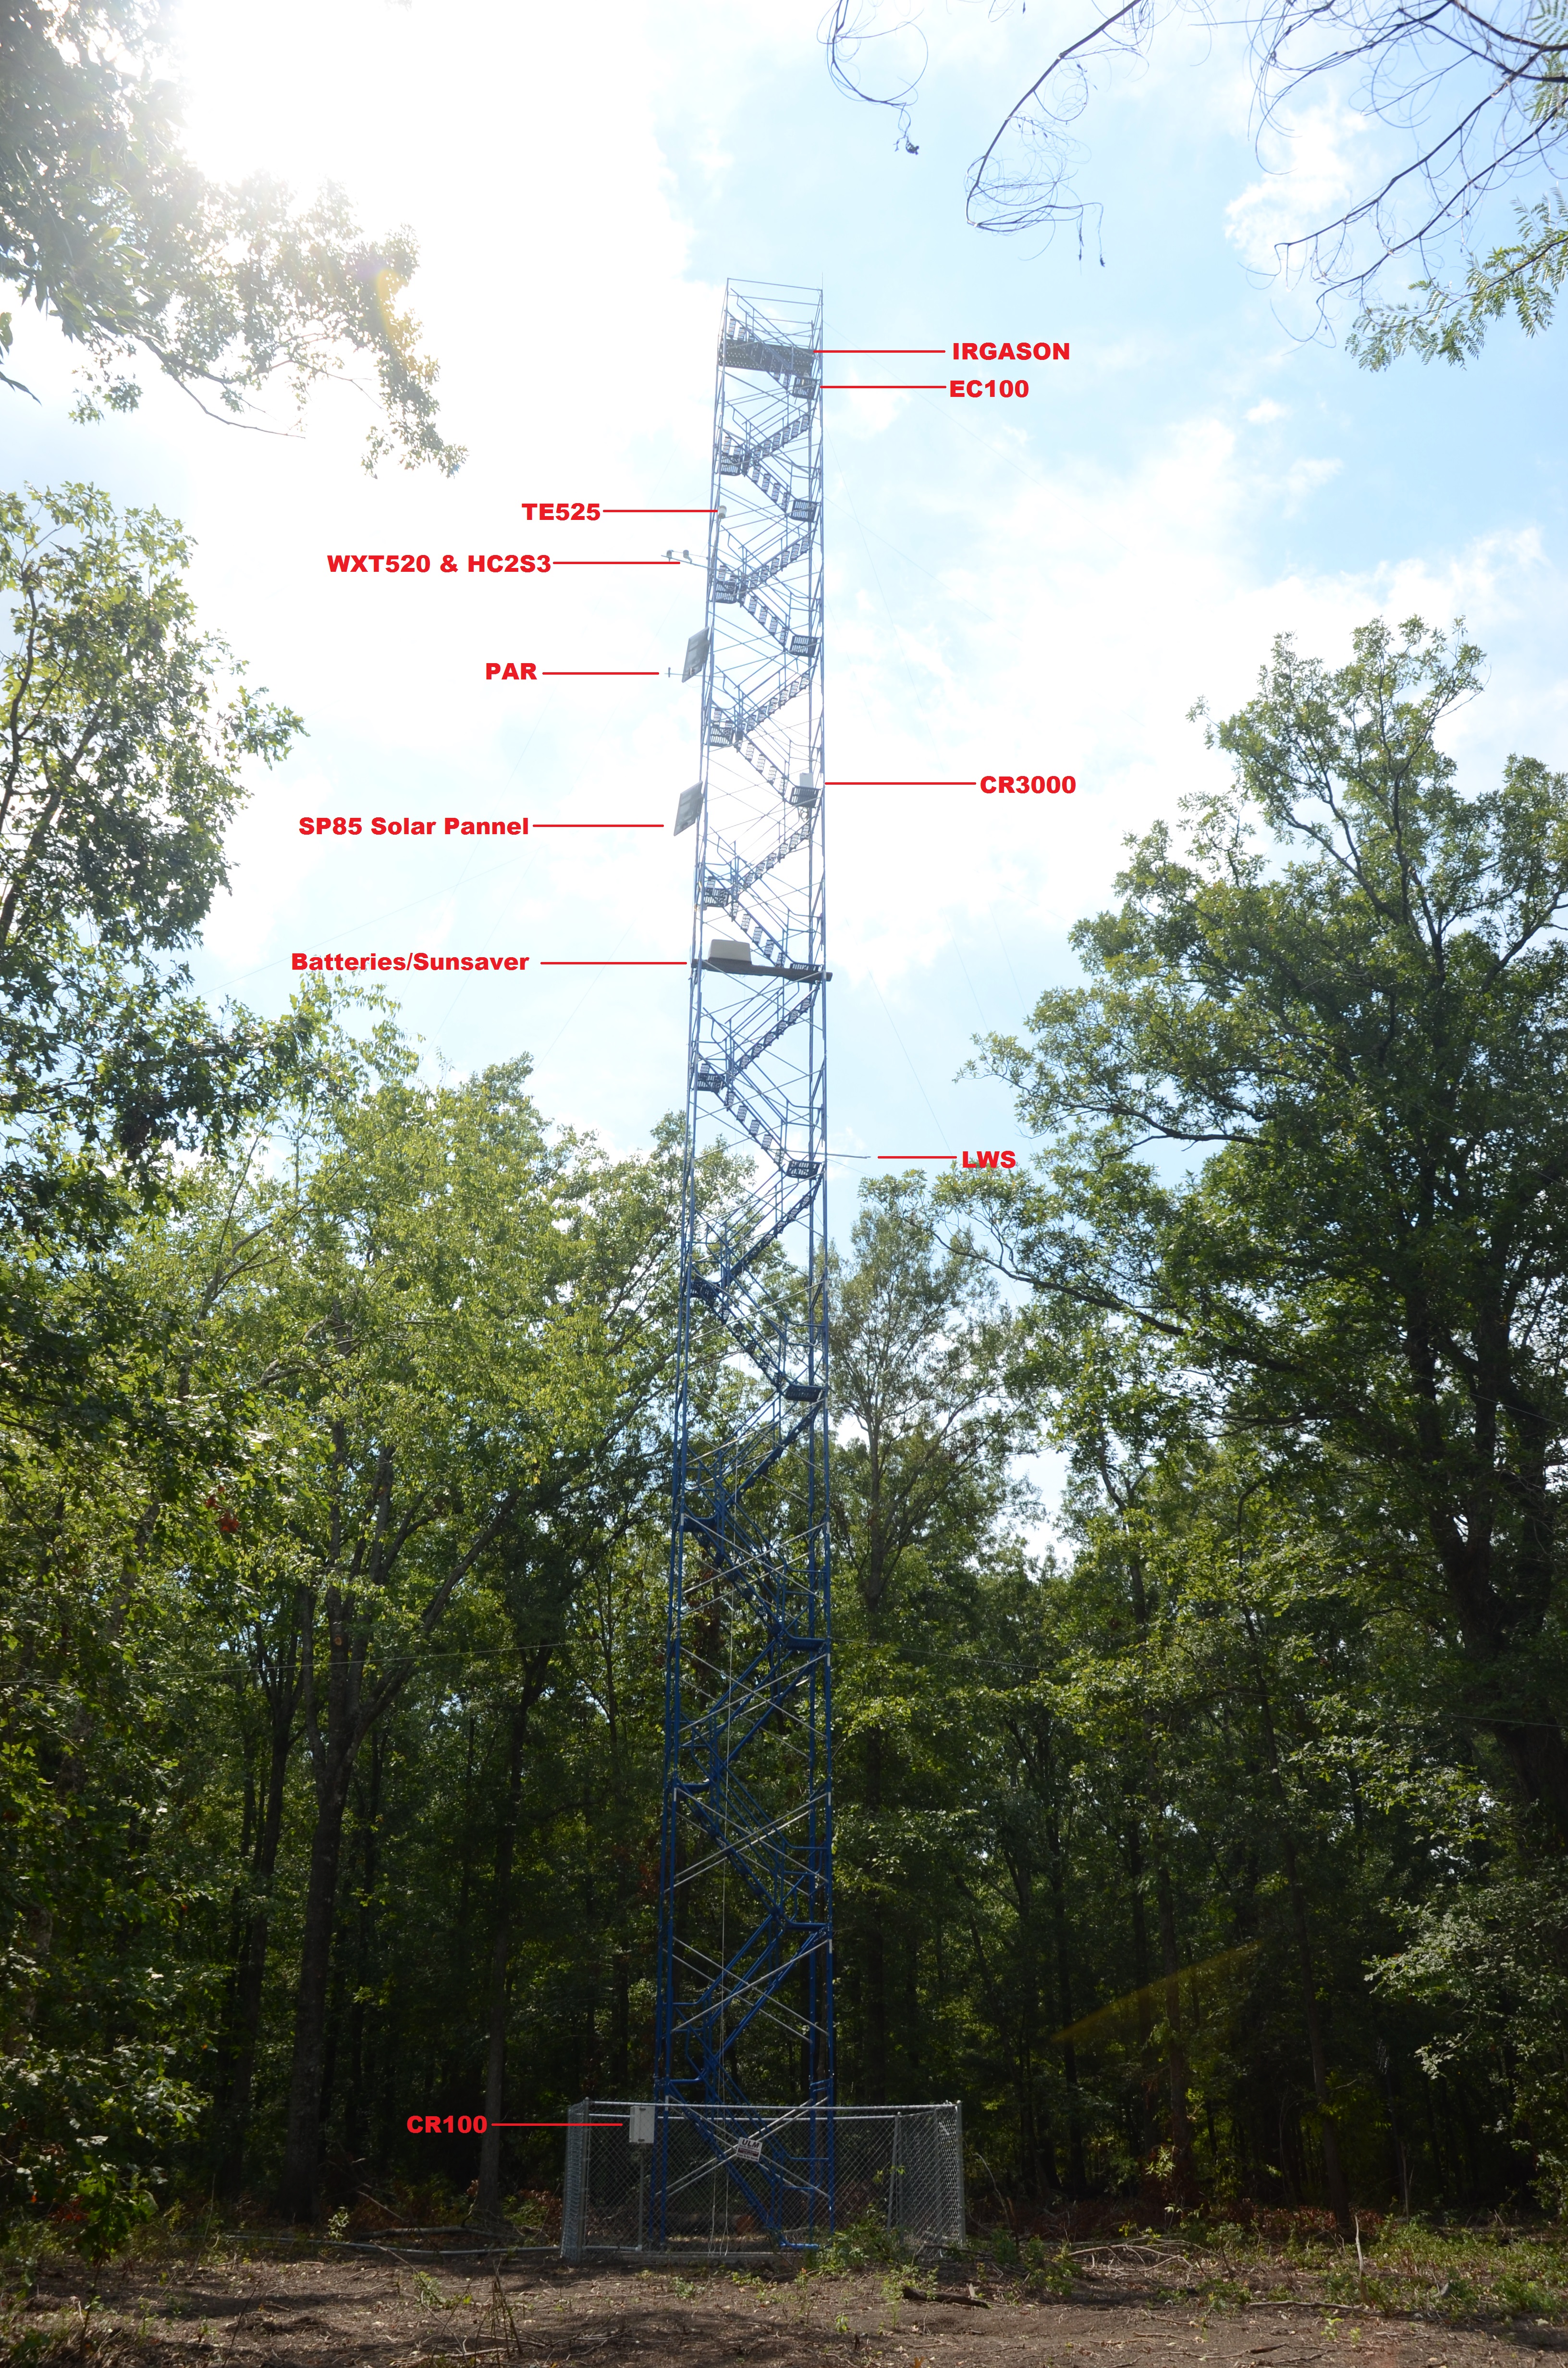 Labelled Tower